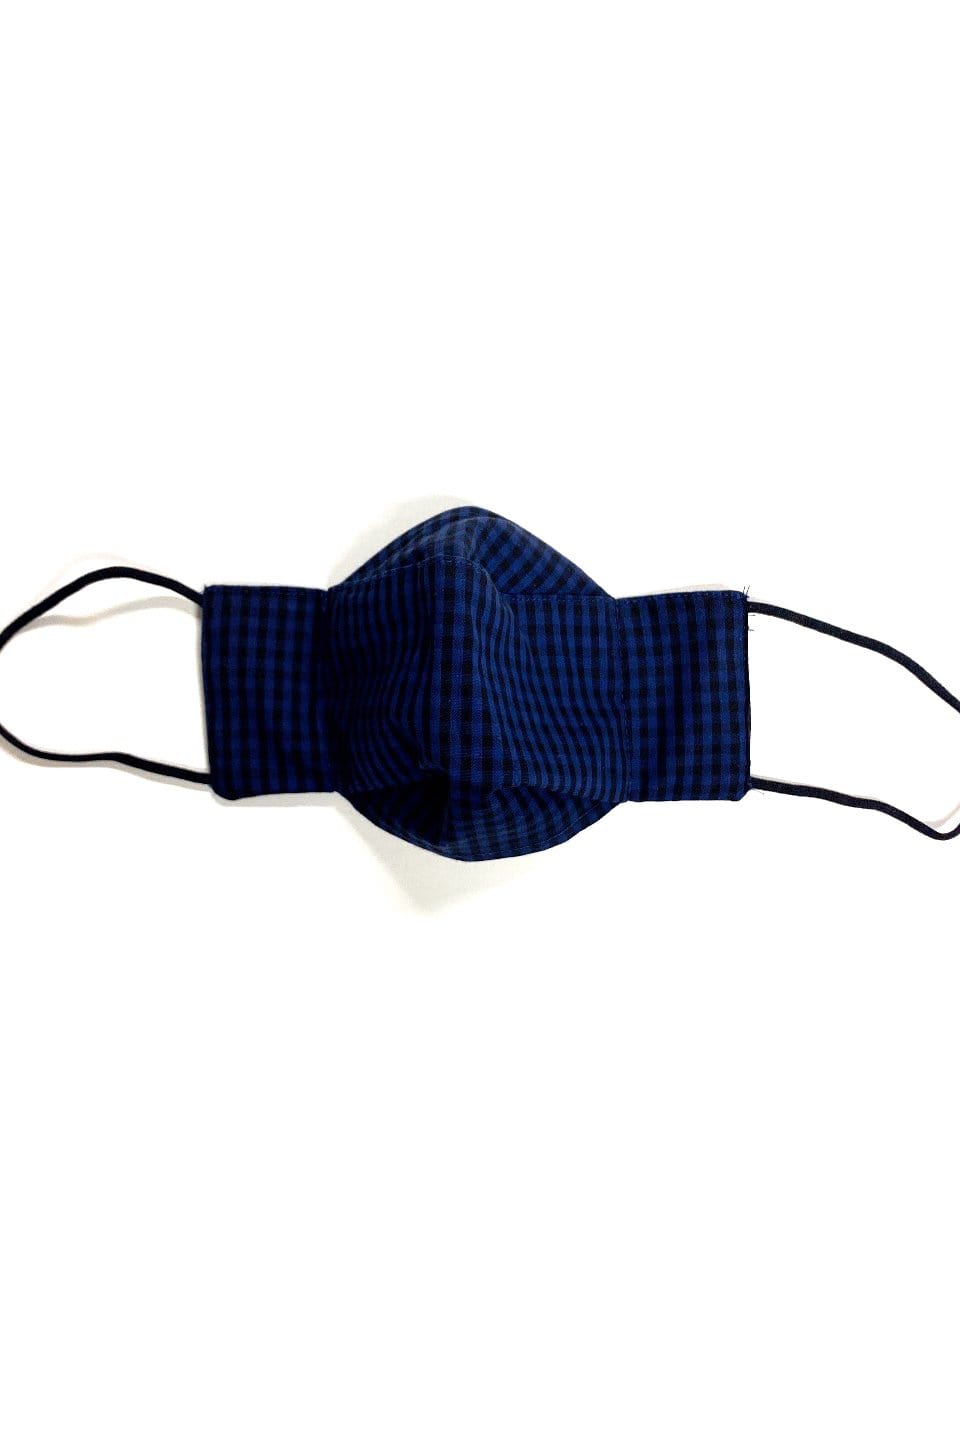 Box Pleated Face Masks Dark Navy Gingham (Box Pleated Mask With Filter Pocket) - Chloe Dao